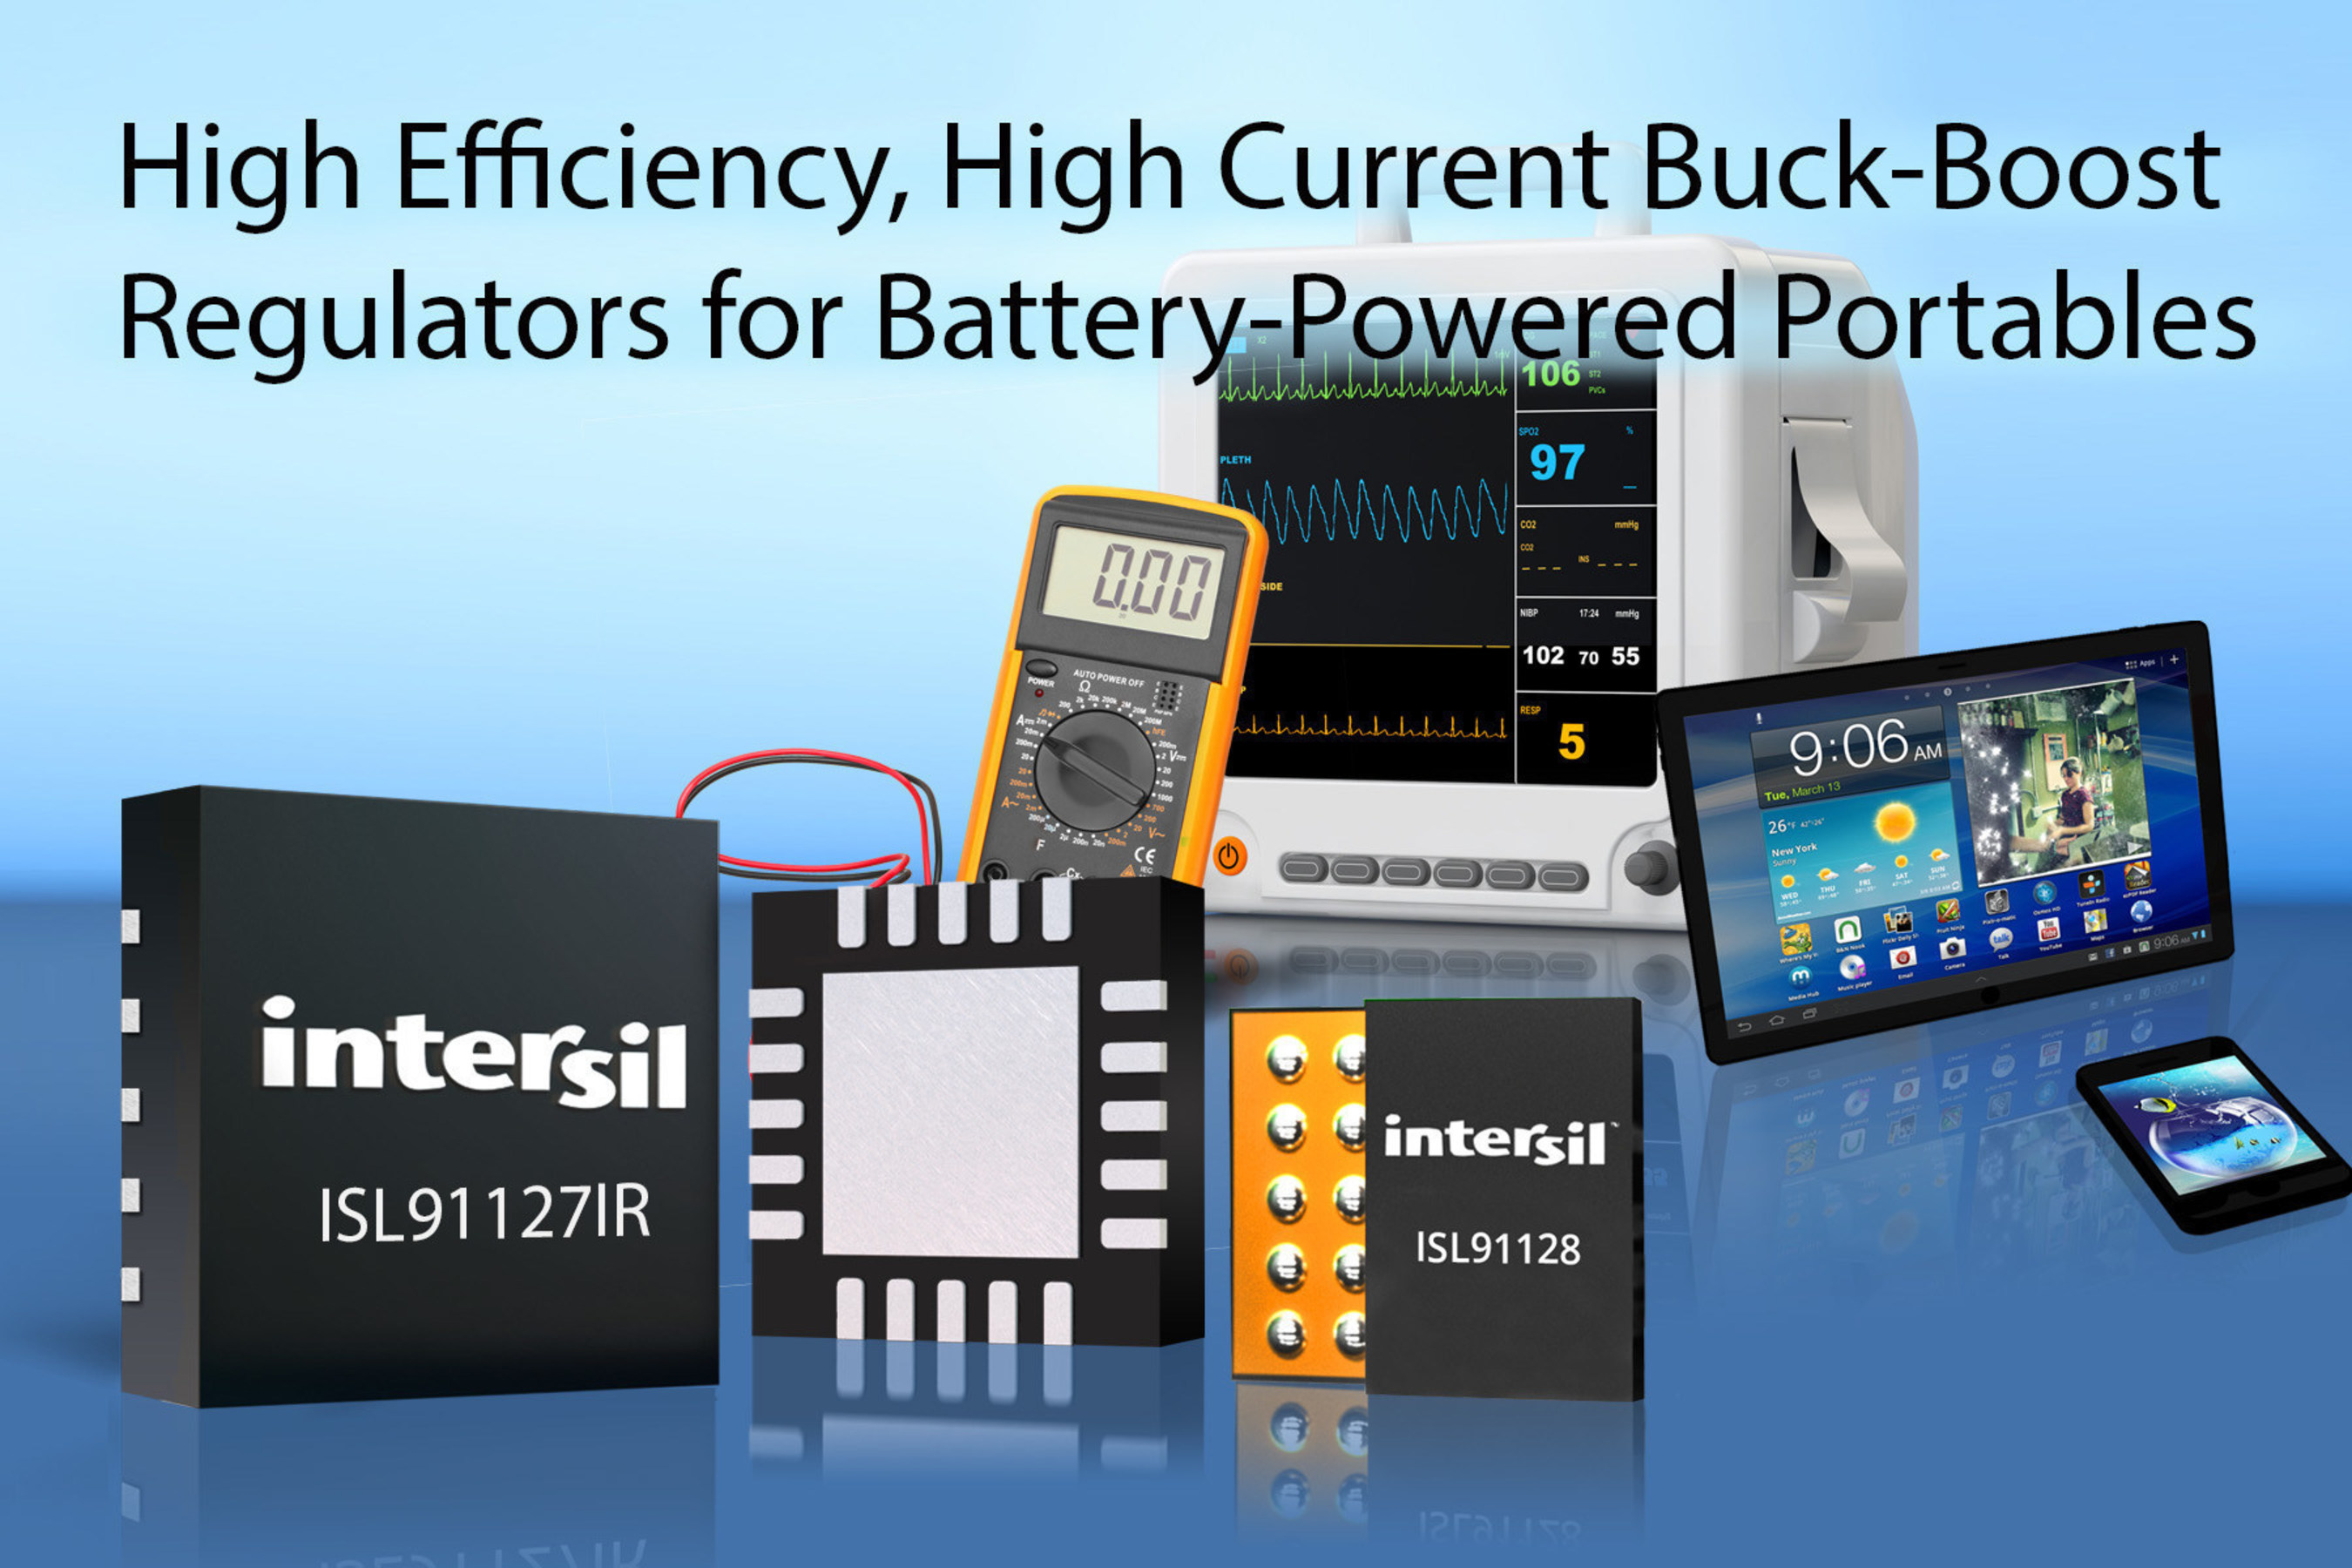 Intersil's ISL91127 and ISL91128 buck-boost regulators deliver up to 96% efficiency and the industry's lowest quiescent current for low-voltage, battery-operated systems.